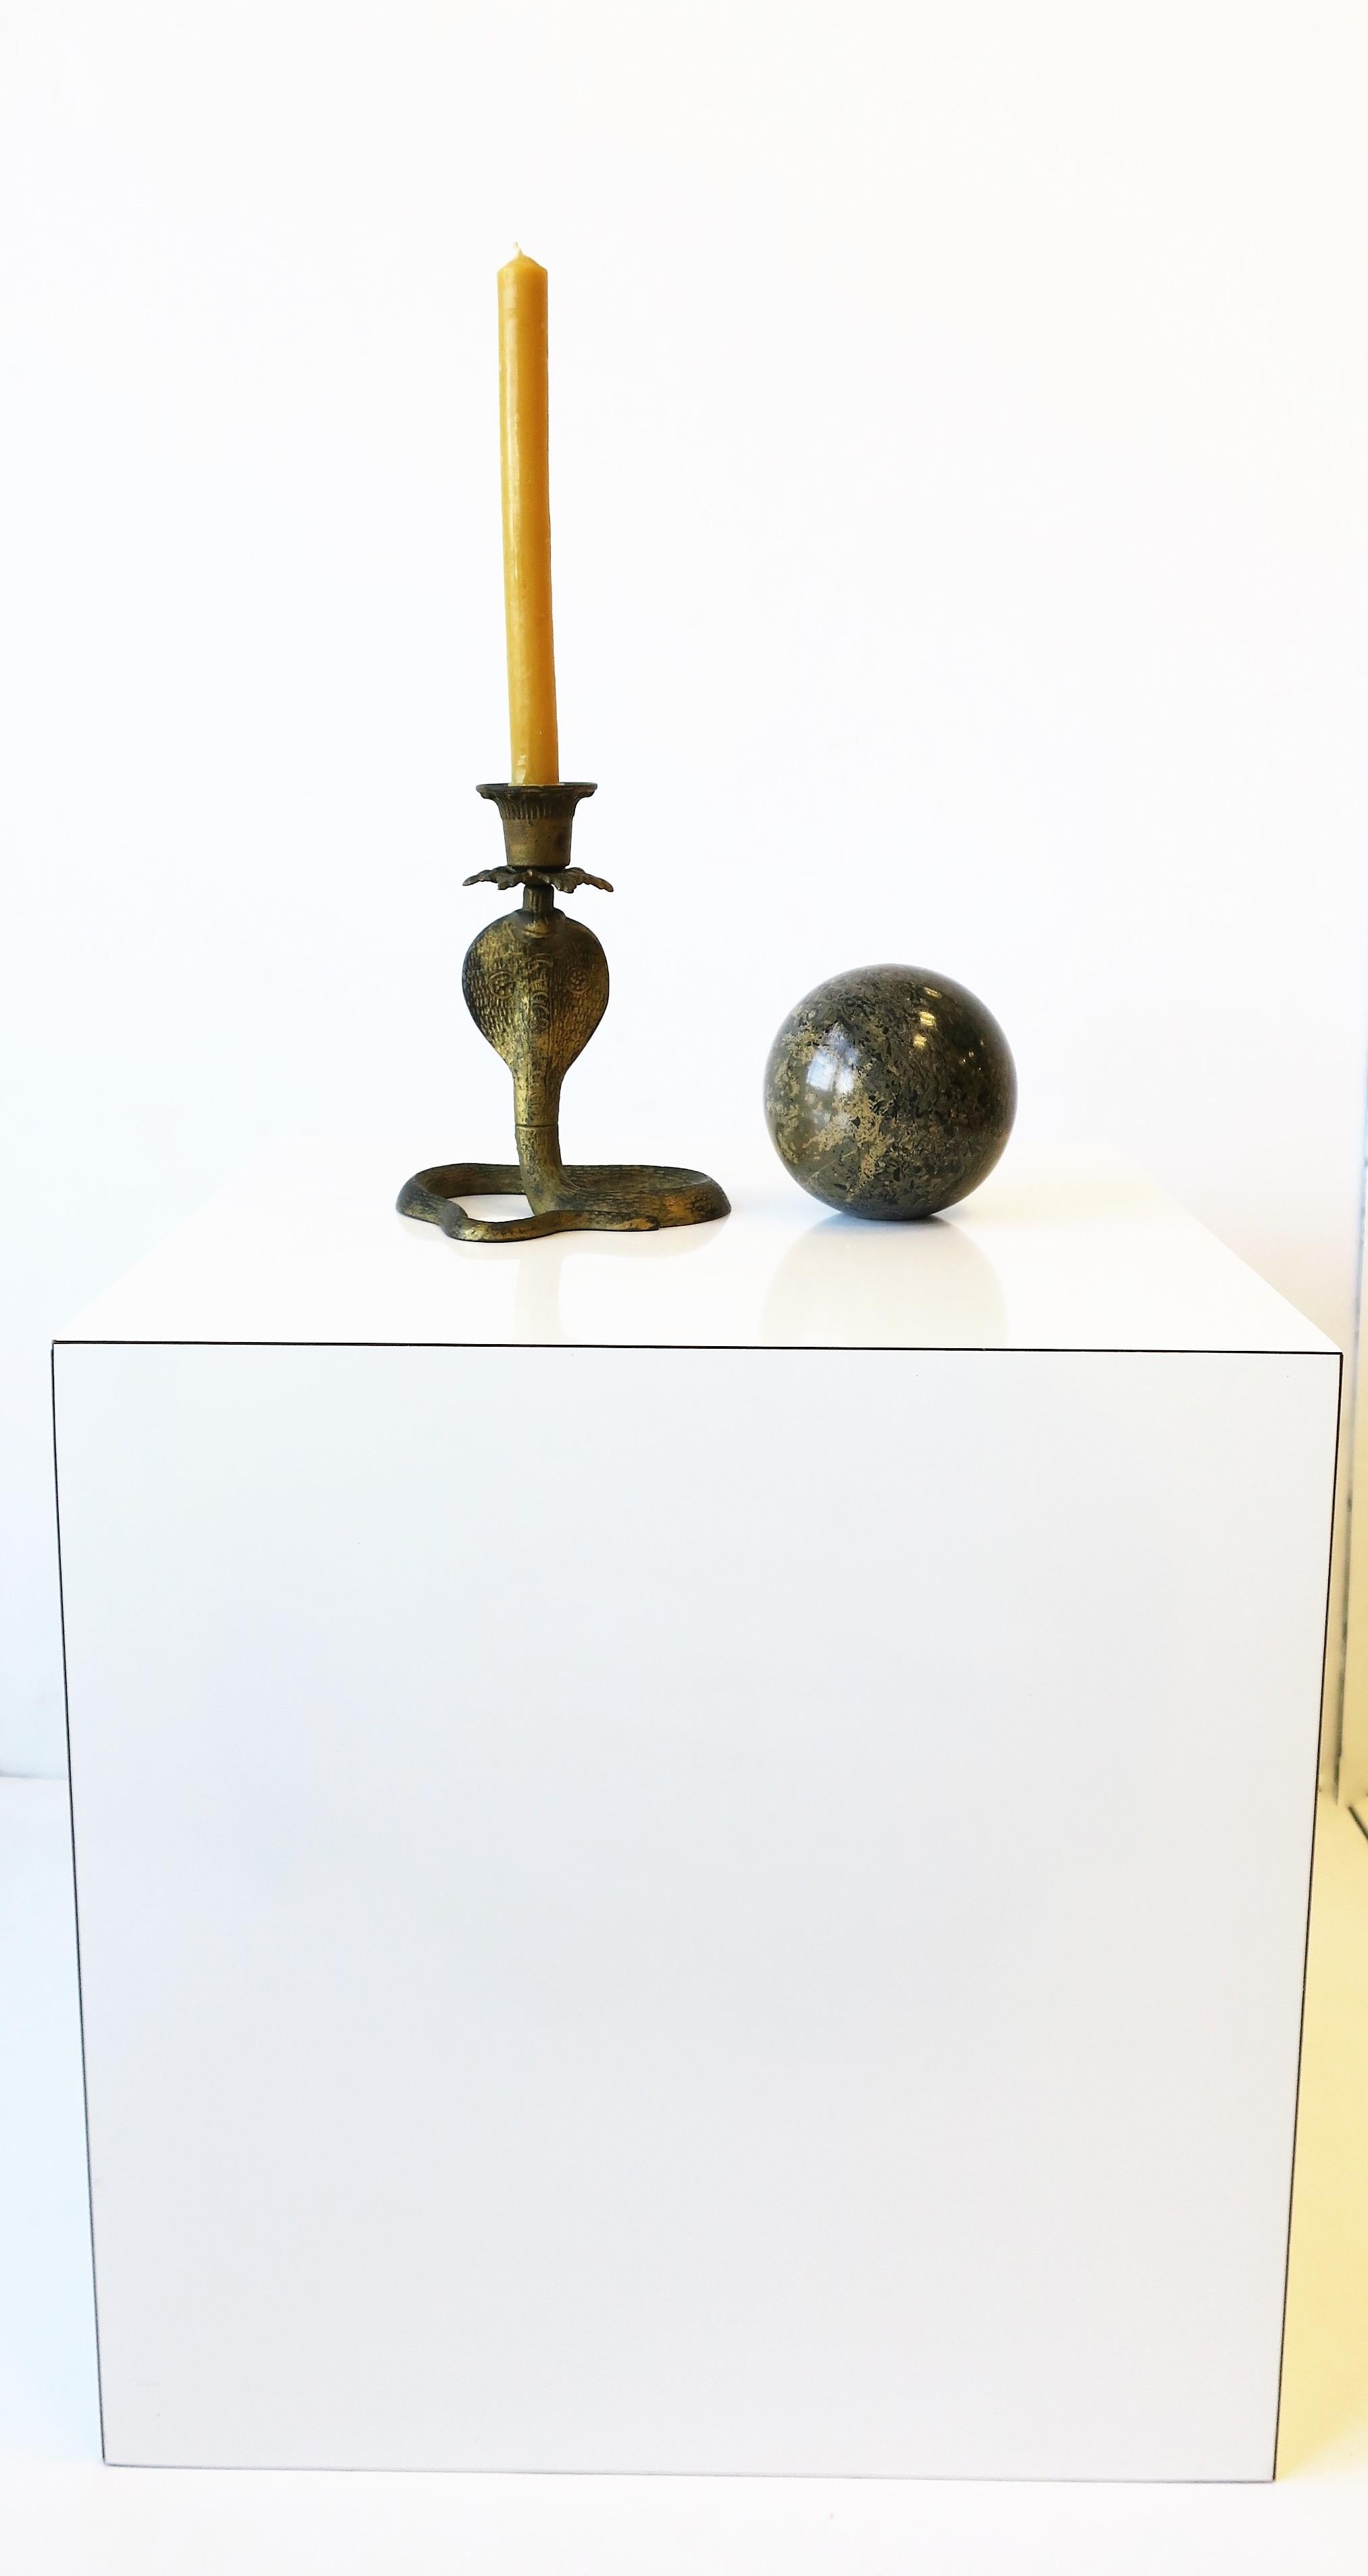 20th Century Modern Art Deco Marble Sphere Black and other Hues, circa 1970s